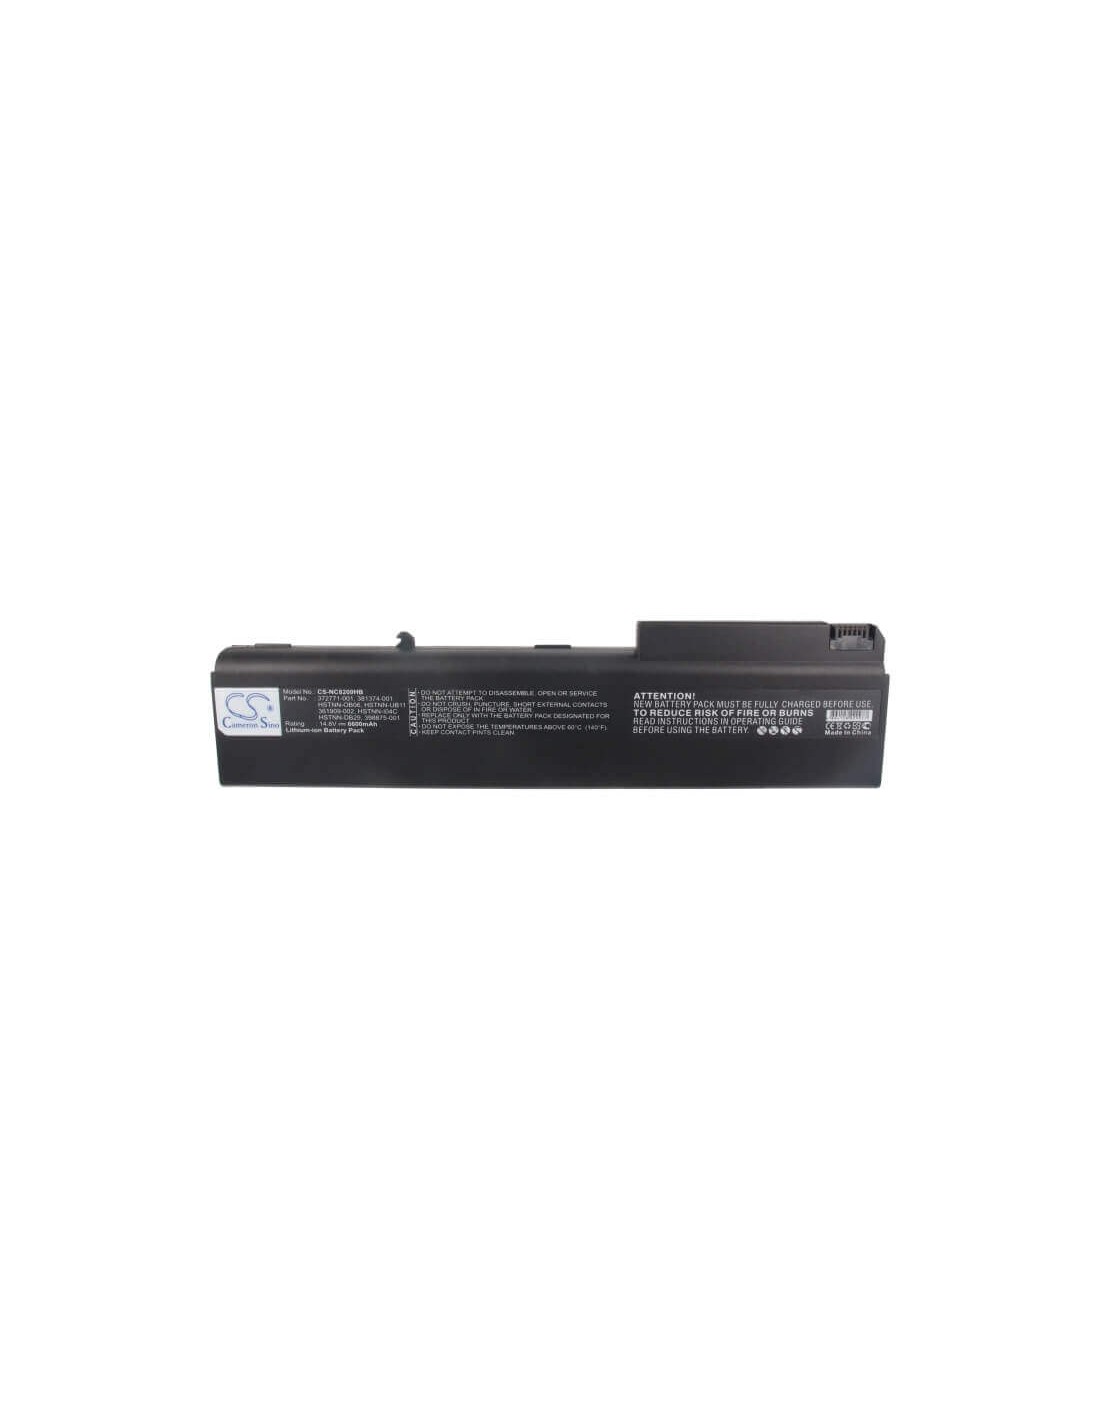 Black Battery for HP Business Notebook 8700, Business Notebook nw8440 Mobile Workstation, Business Notebook 8510w Mobile Worksta